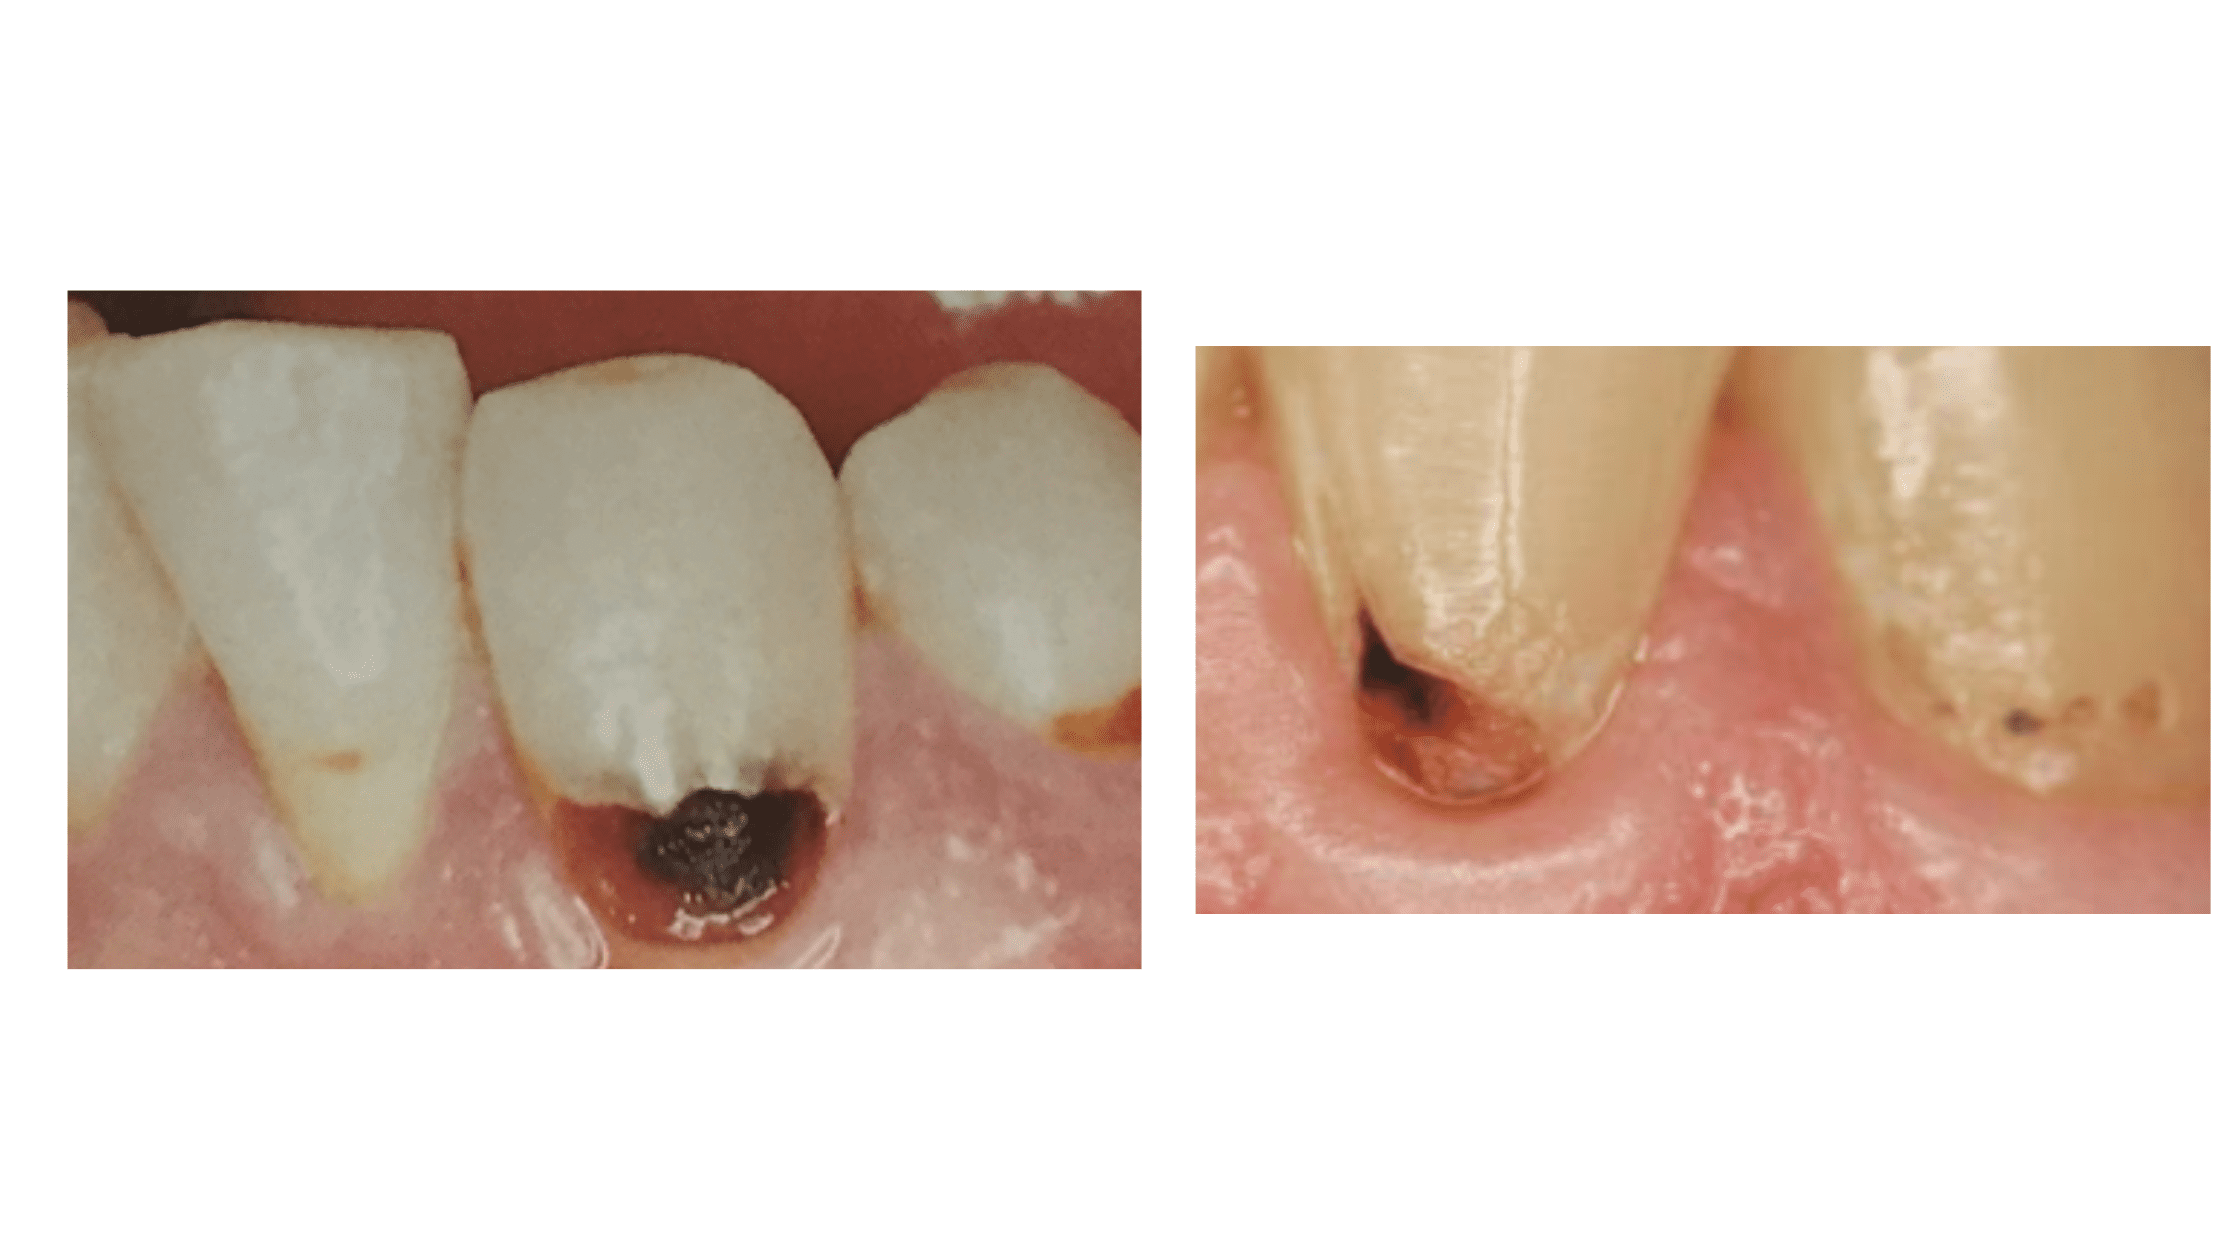 Clinical pictures of teeth decaying at gum line